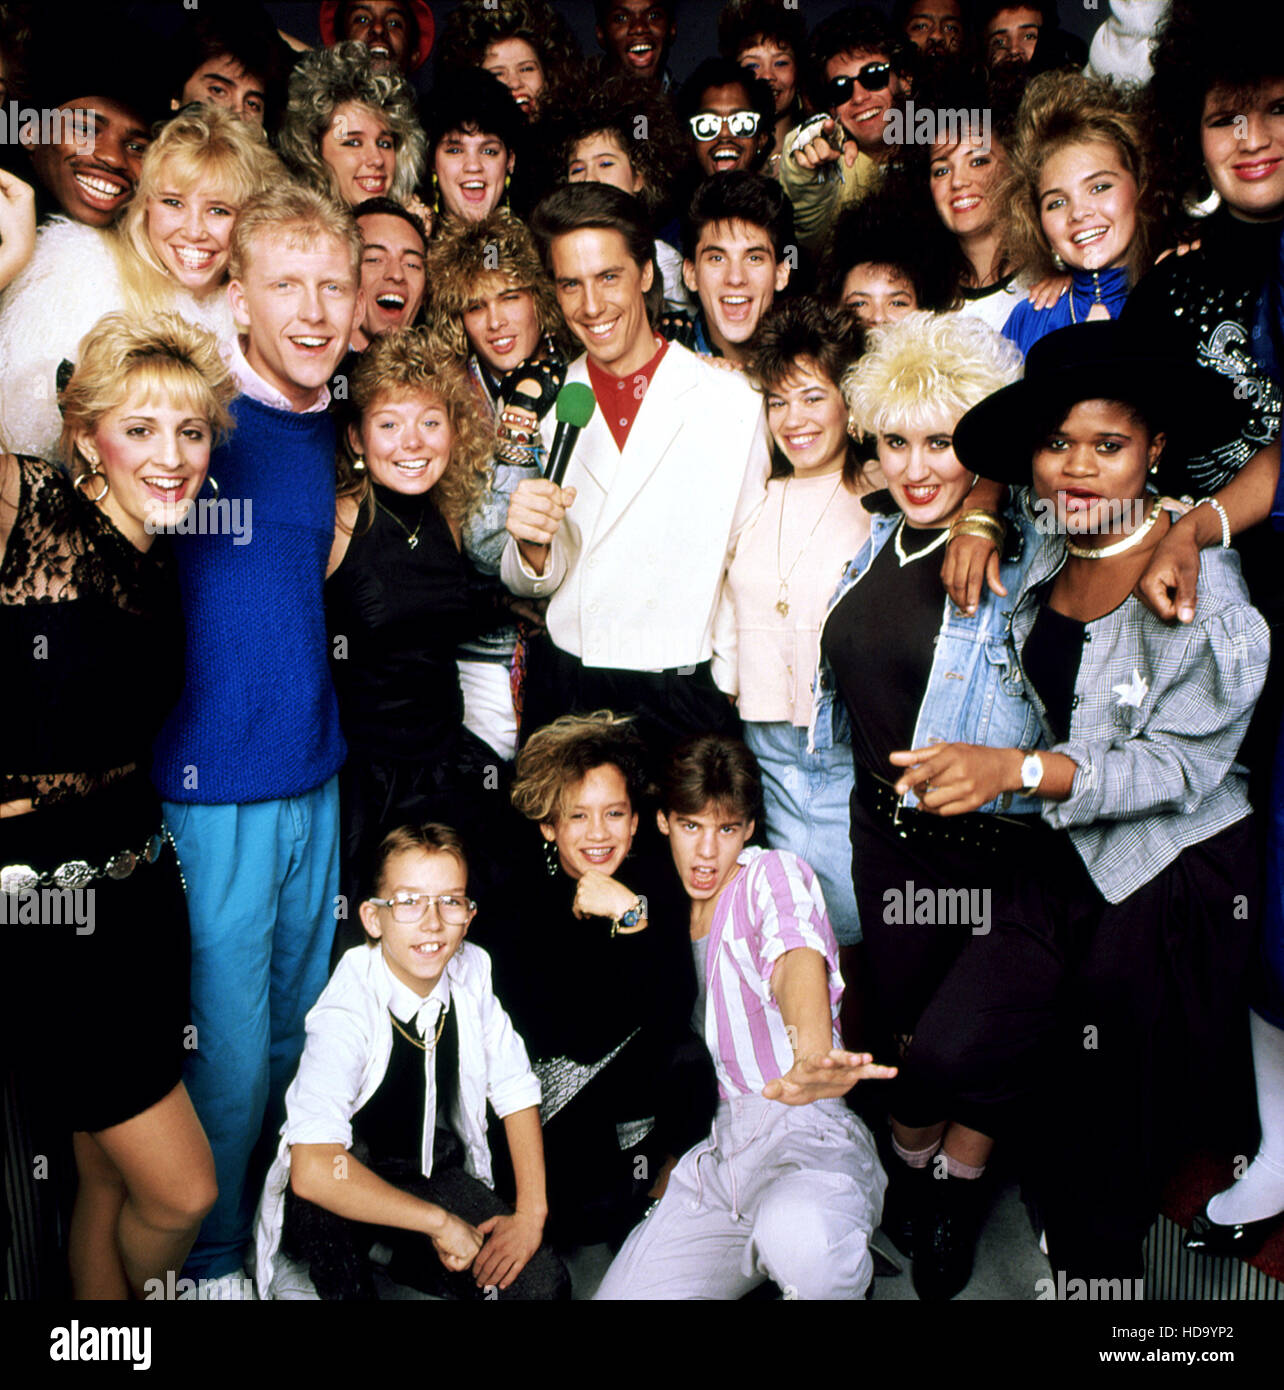 DANCE PARTY USA, host Andy Gury (center), (1986-1992), © USA